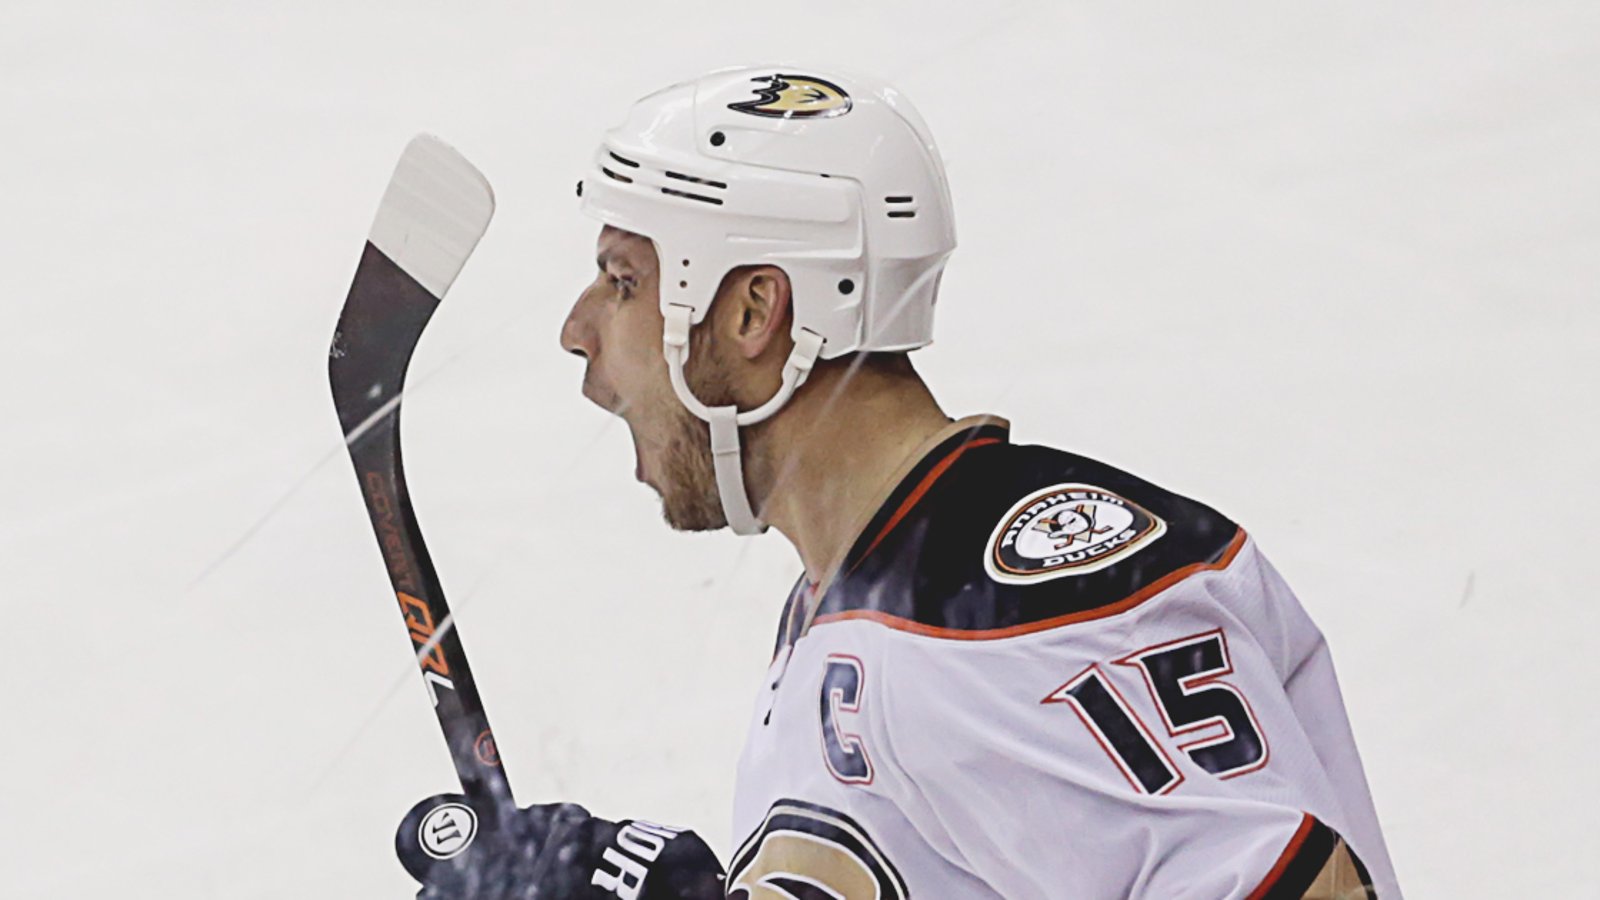 Watch: Getzlaf's second goal of the game